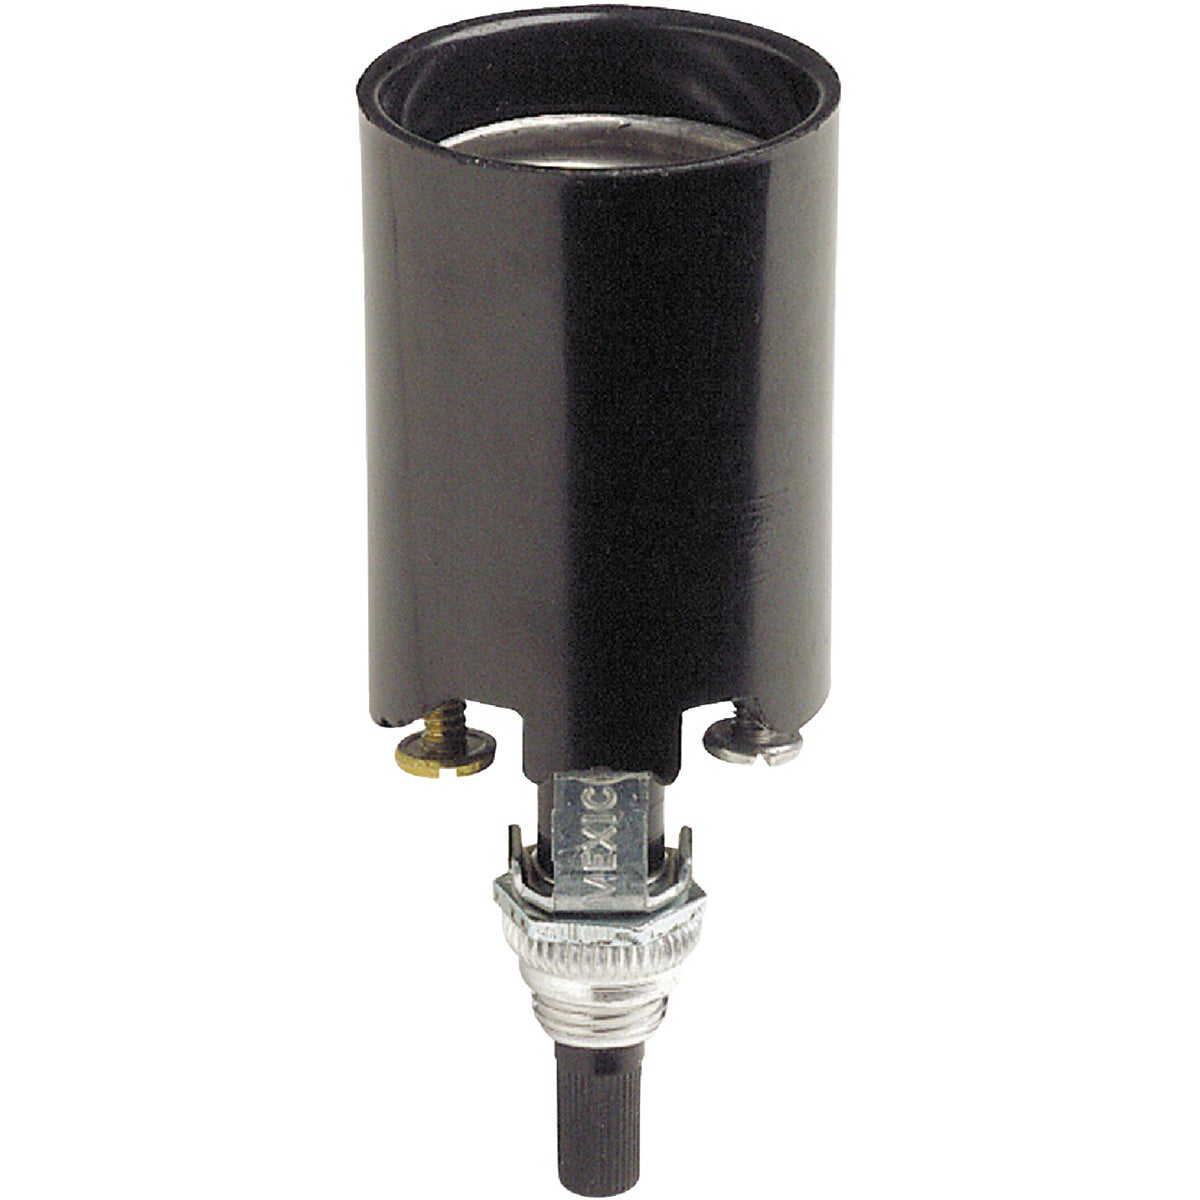 Item 523277, Phenolic candle socket with removable turn-knob. 1-piece body, 1-1/4 In. O.